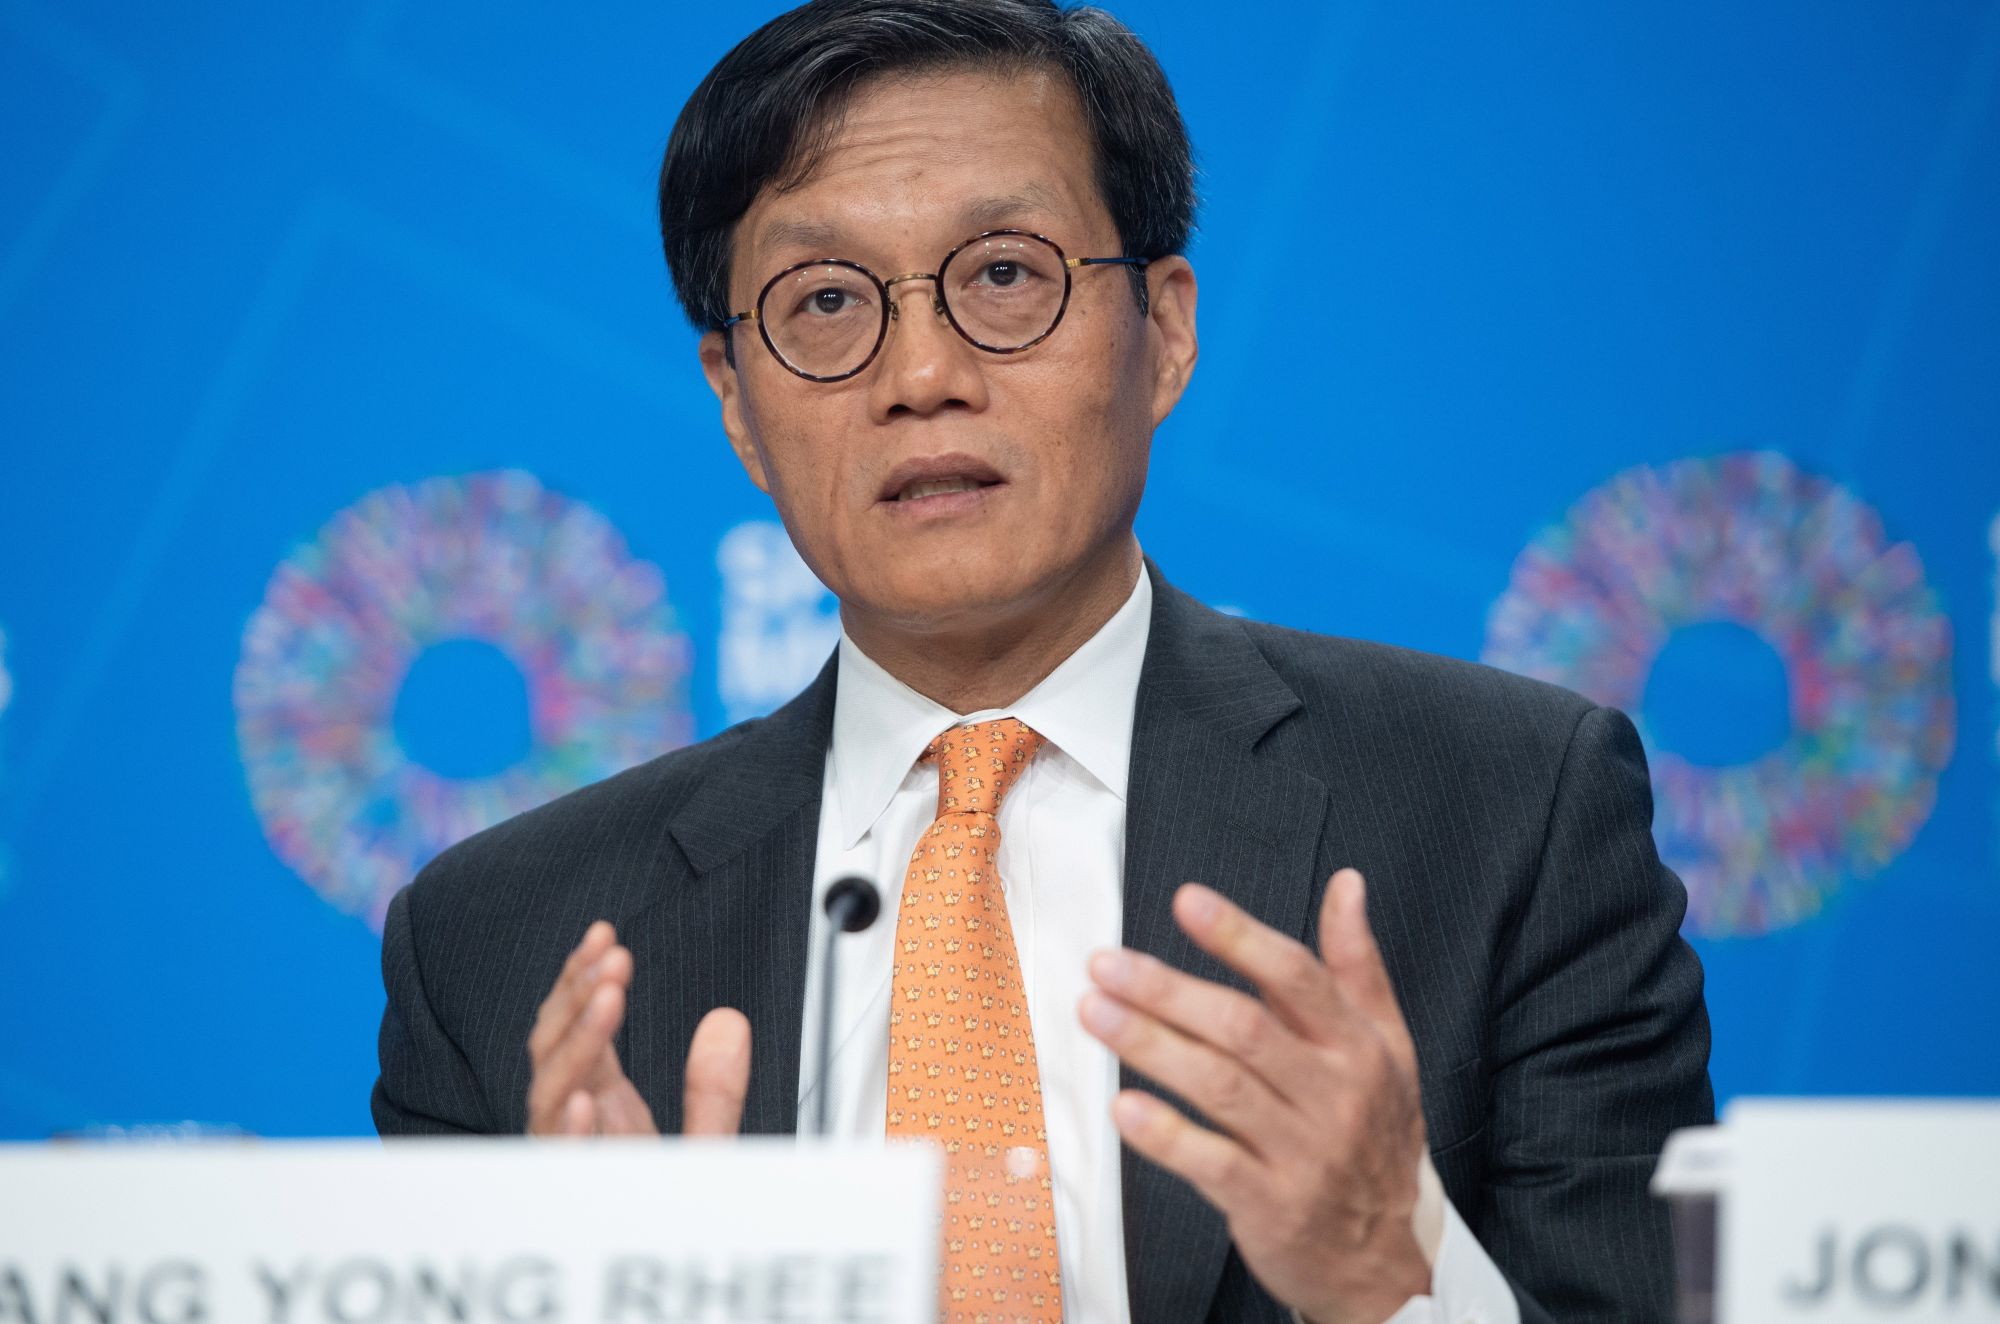 Changyong Rehee, Director of the Asia and Pacific Department at the IMF, warned that unpredictable economic policies could pose a new threat to growth at the 2019 Spring Meeting of the International Monetary Fund on April 12. (Photo: VNA)